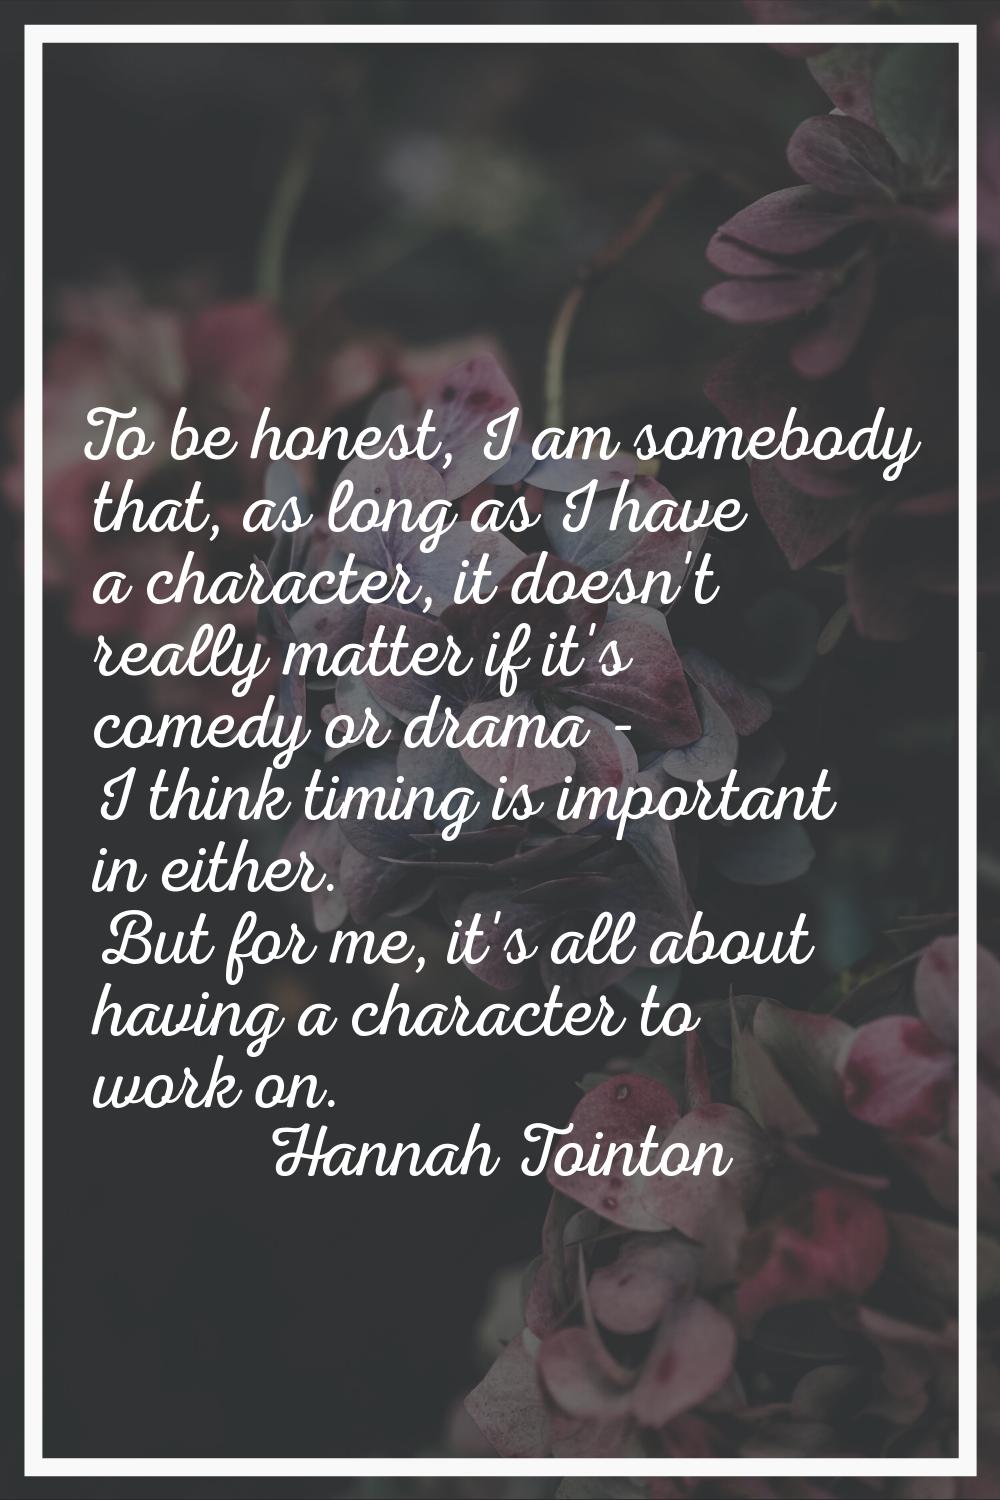 To be honest, I am somebody that, as long as I have a character, it doesn't really matter if it's c